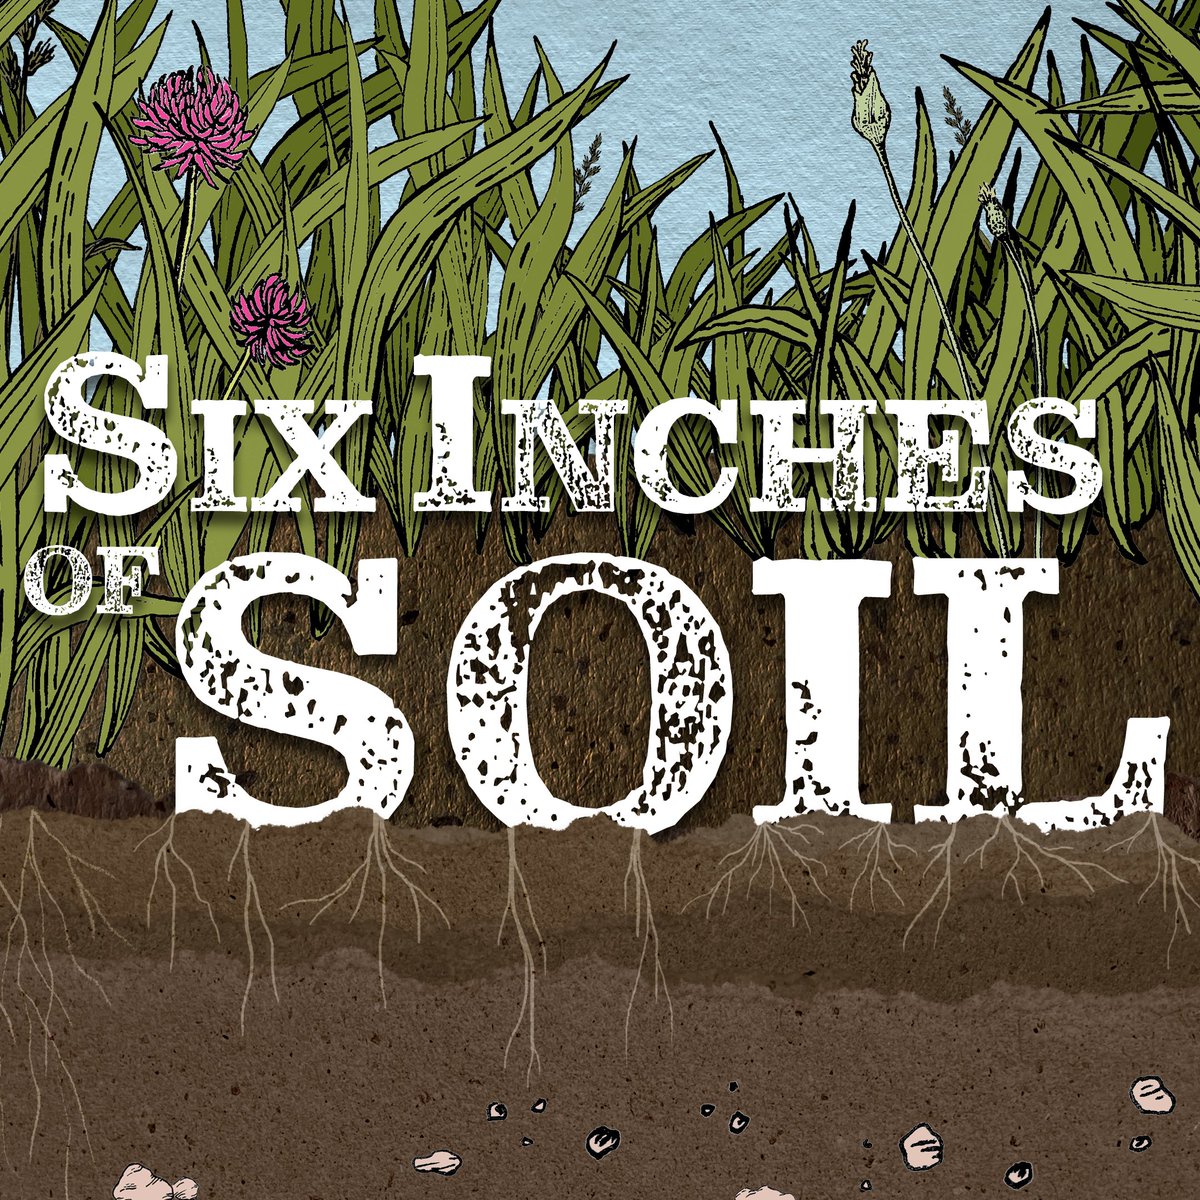 You know Tree Amble Podcast is about regen farming and +ve land management for wildlife. We were at the premiere of Six Inches of Soil at Oxford Real - with Sustainable Keswick this film is coming to Keswick Alhambra Cinema on 20th March @sixinchessoil @keswickAlhambra